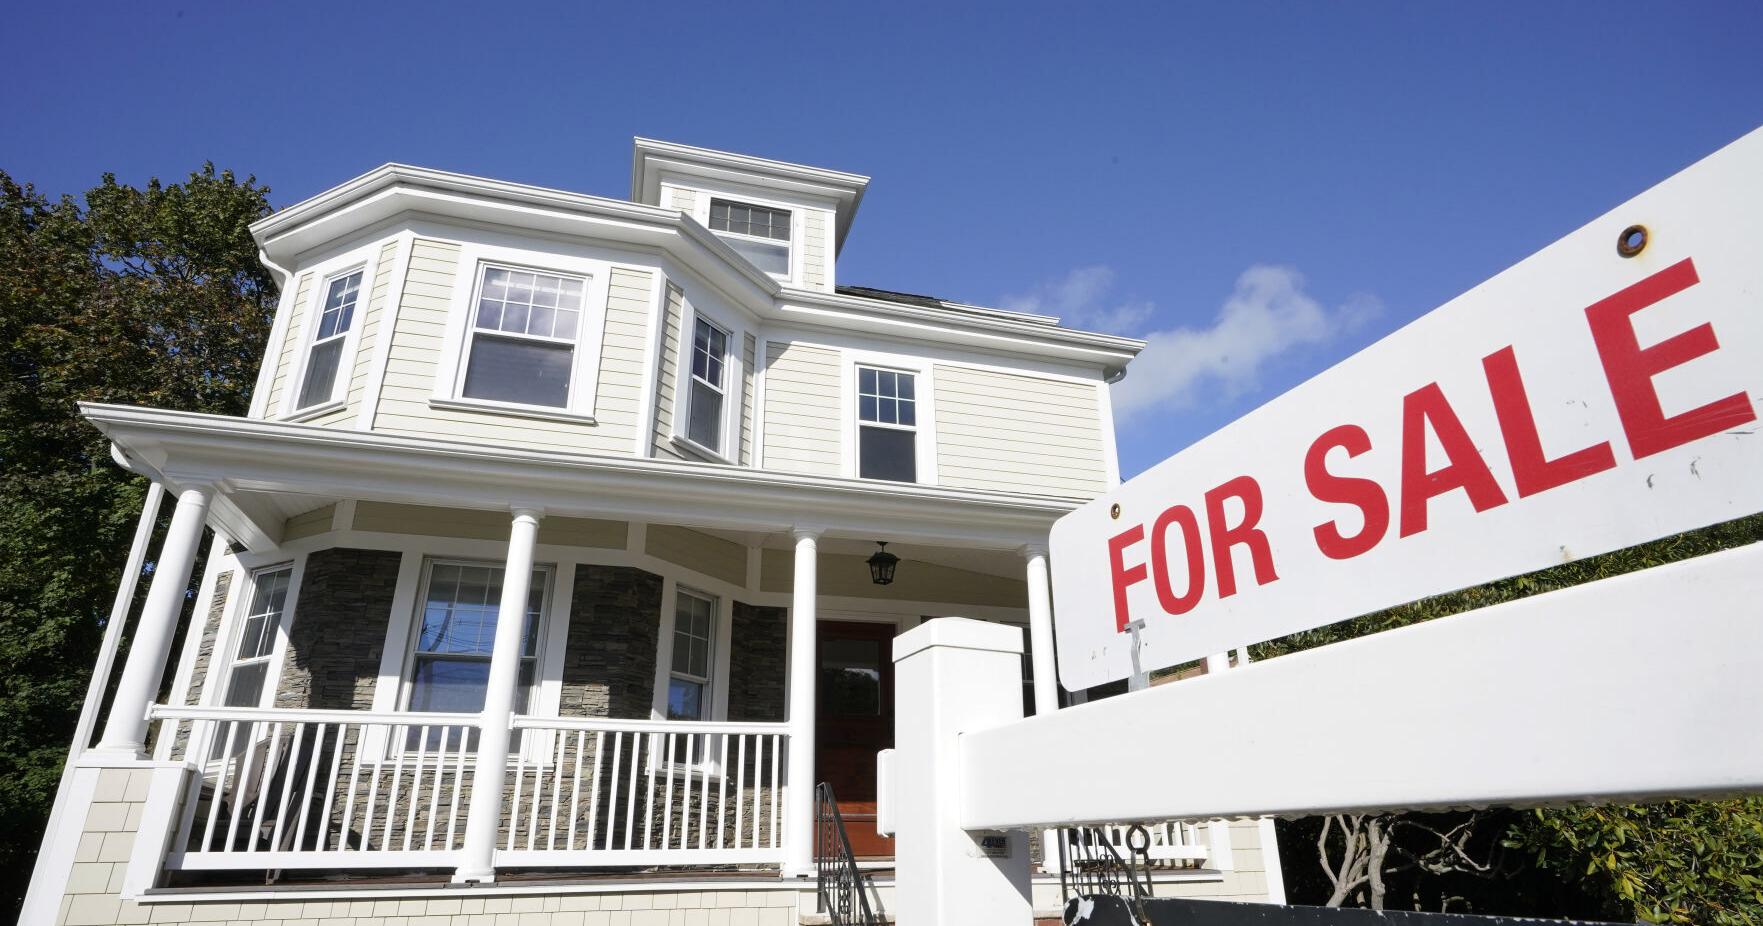 SC home sales slipped 12.5% last year as median price surpassed $300,000 for first time